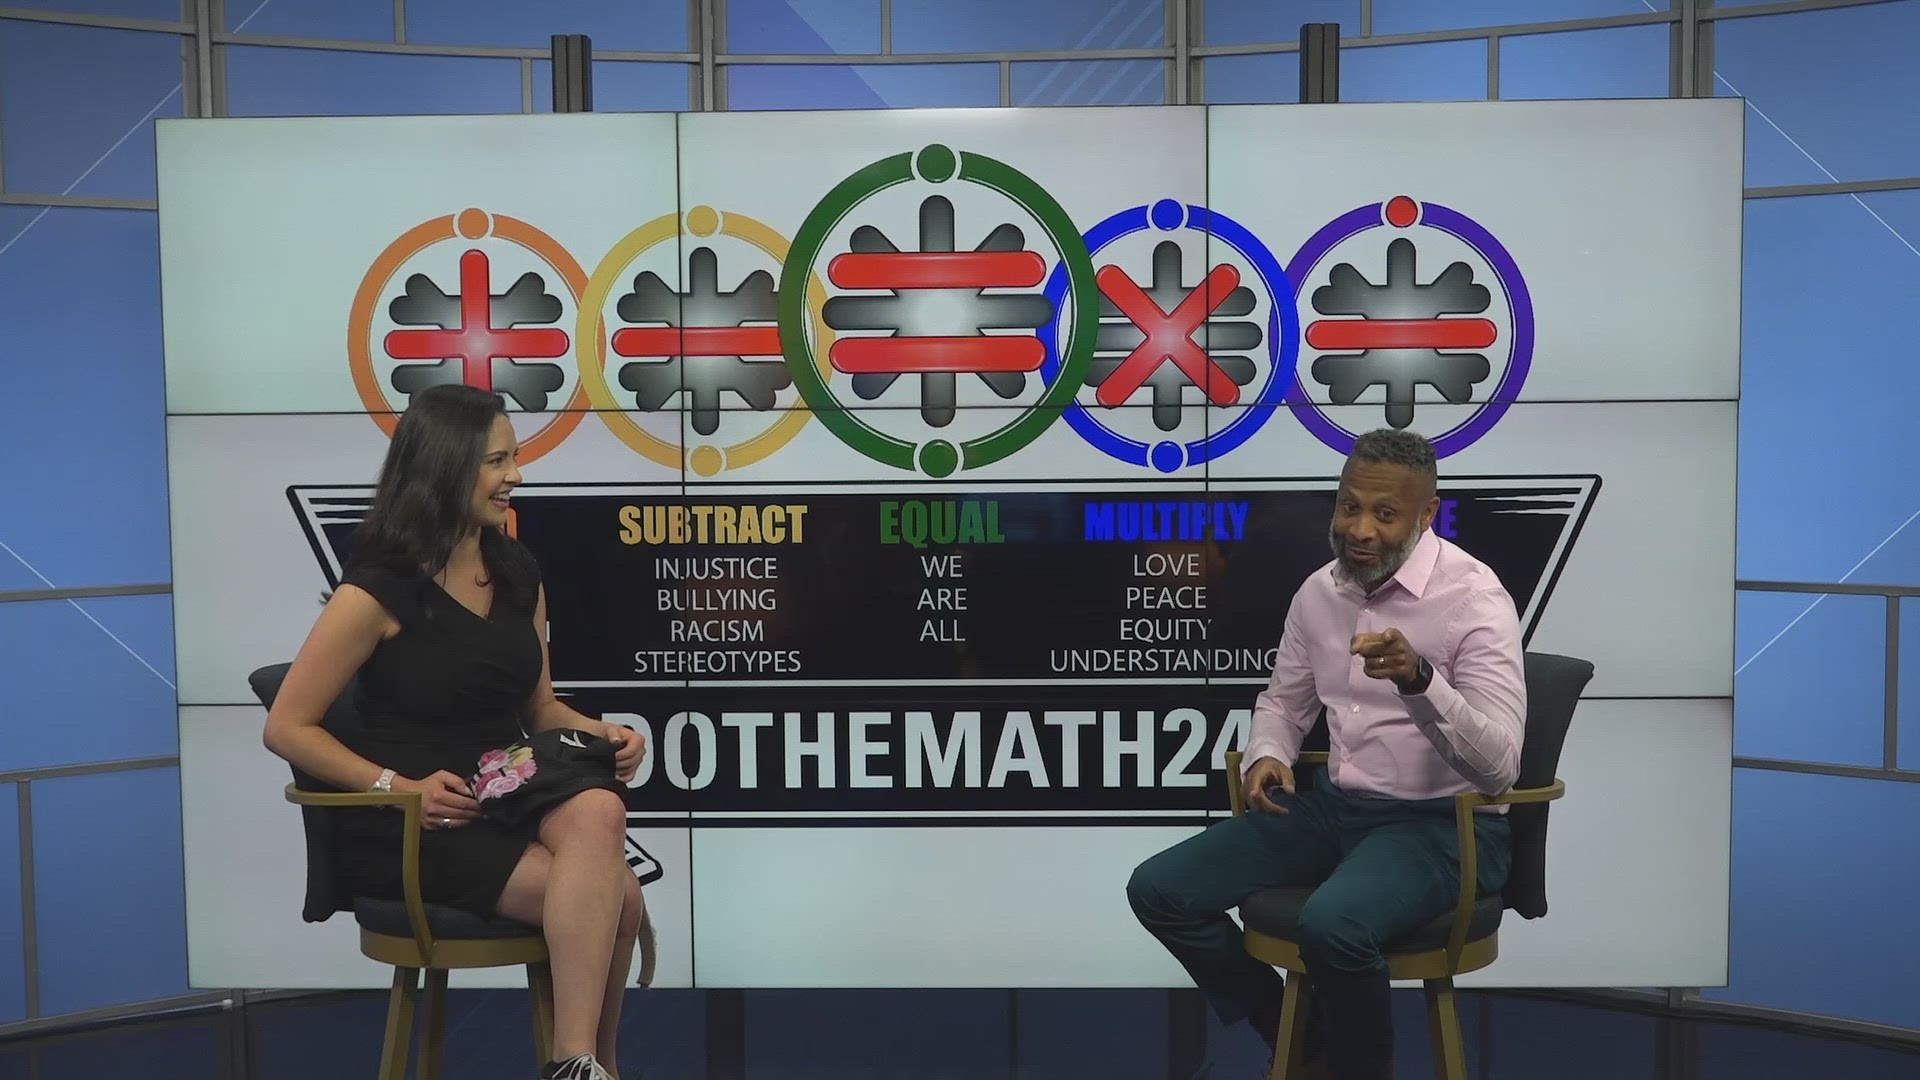 Apparel company Do The Math 247 partners with Des Moines Public Schools to share positive messages promoting diversity, kindness, unity, equality and more.